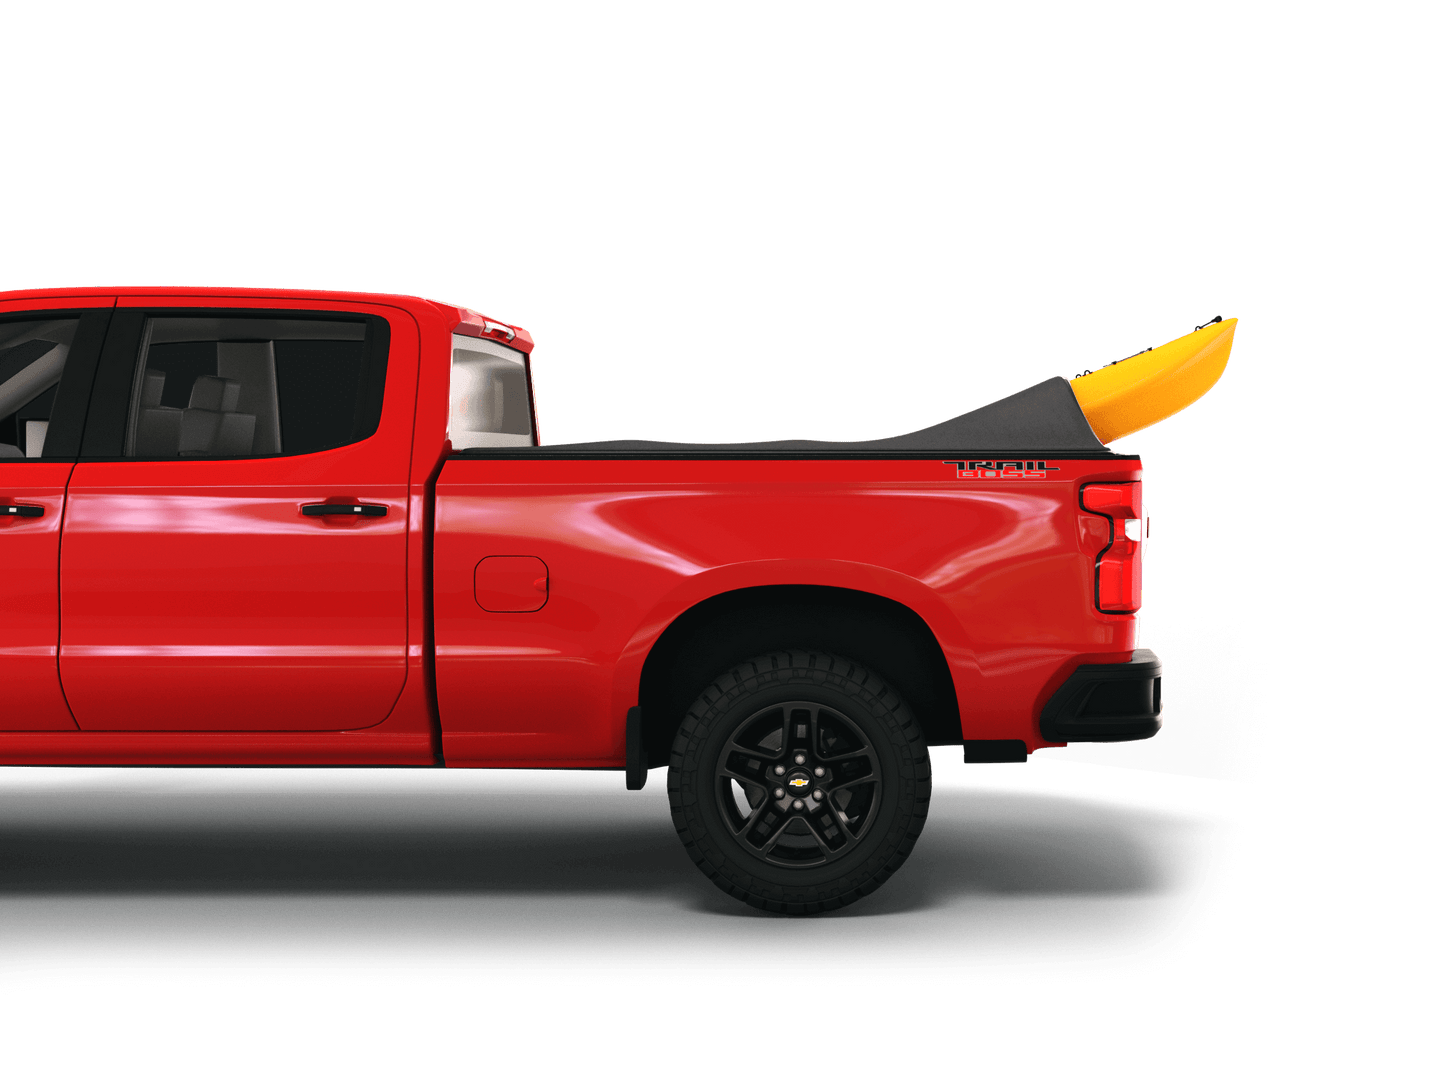 Red Chevrolet Silverado 1500 / GMC Sierra 1500 with yellow kayak under sawtooth stretch truck bed cover